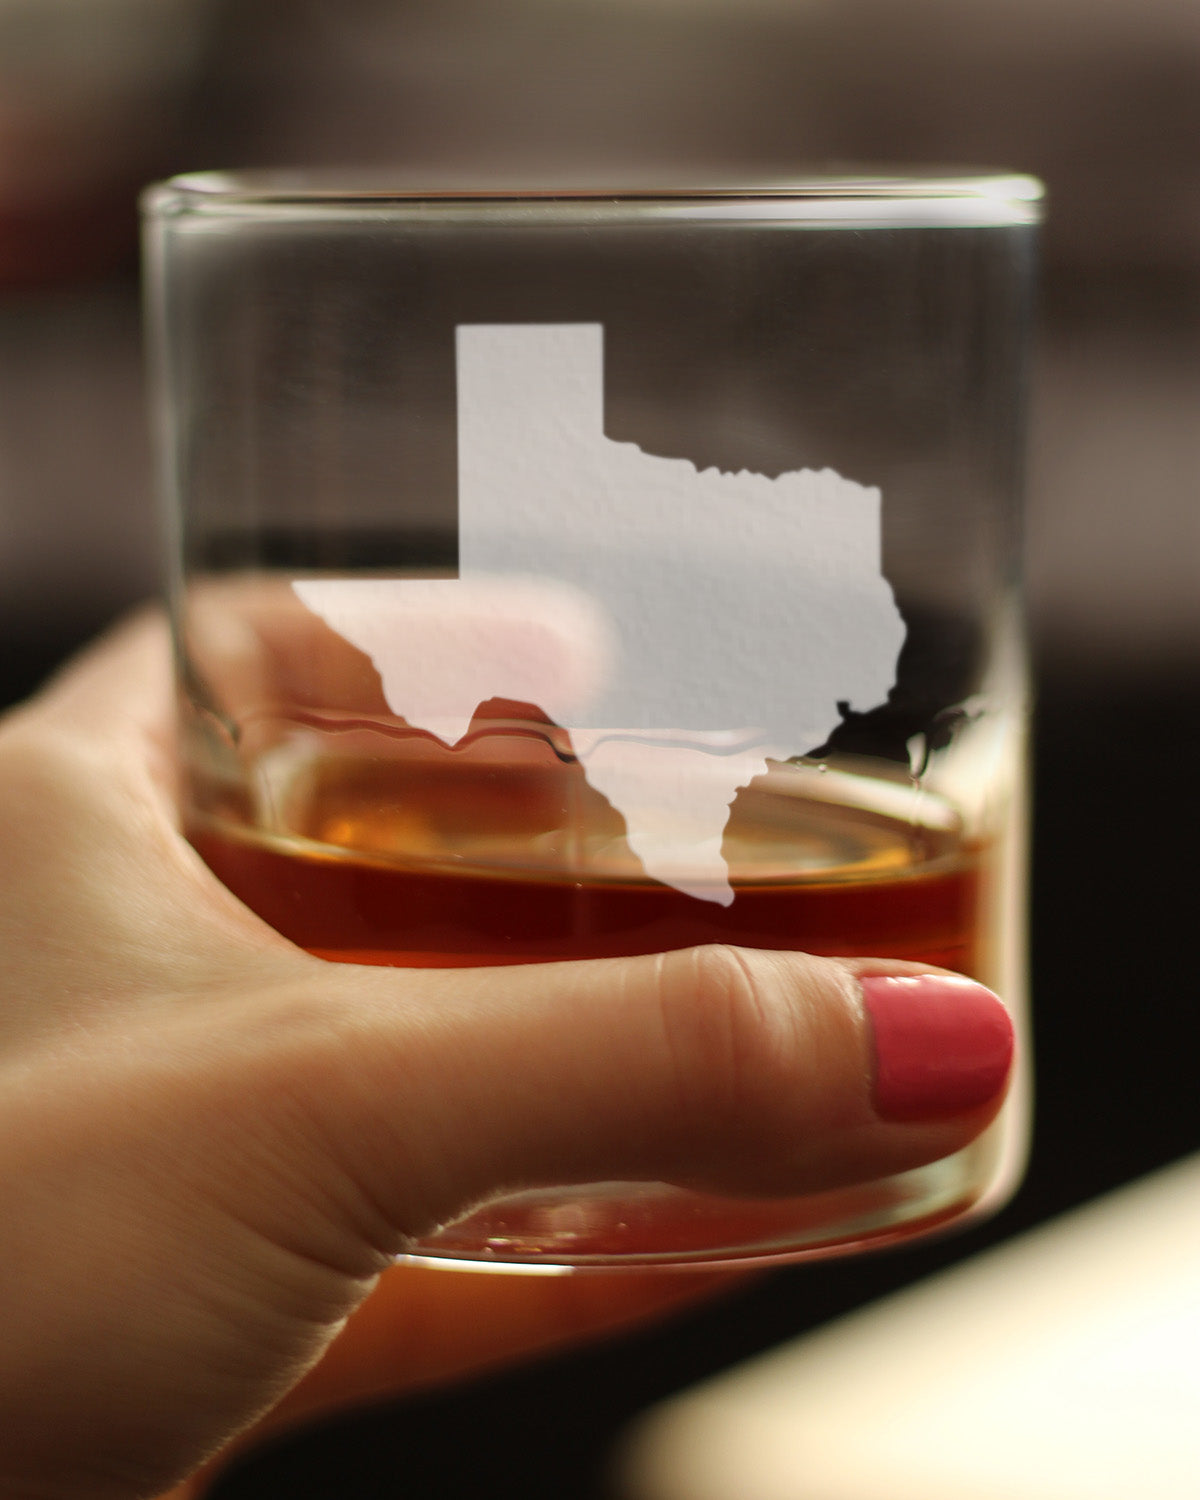 Texas State Outline Whiskey Rocks Glass - State Themed Drinking Decor and Gifts for Texan Women &amp; Men - 10.25 Oz Whisky Tumbler Glasses